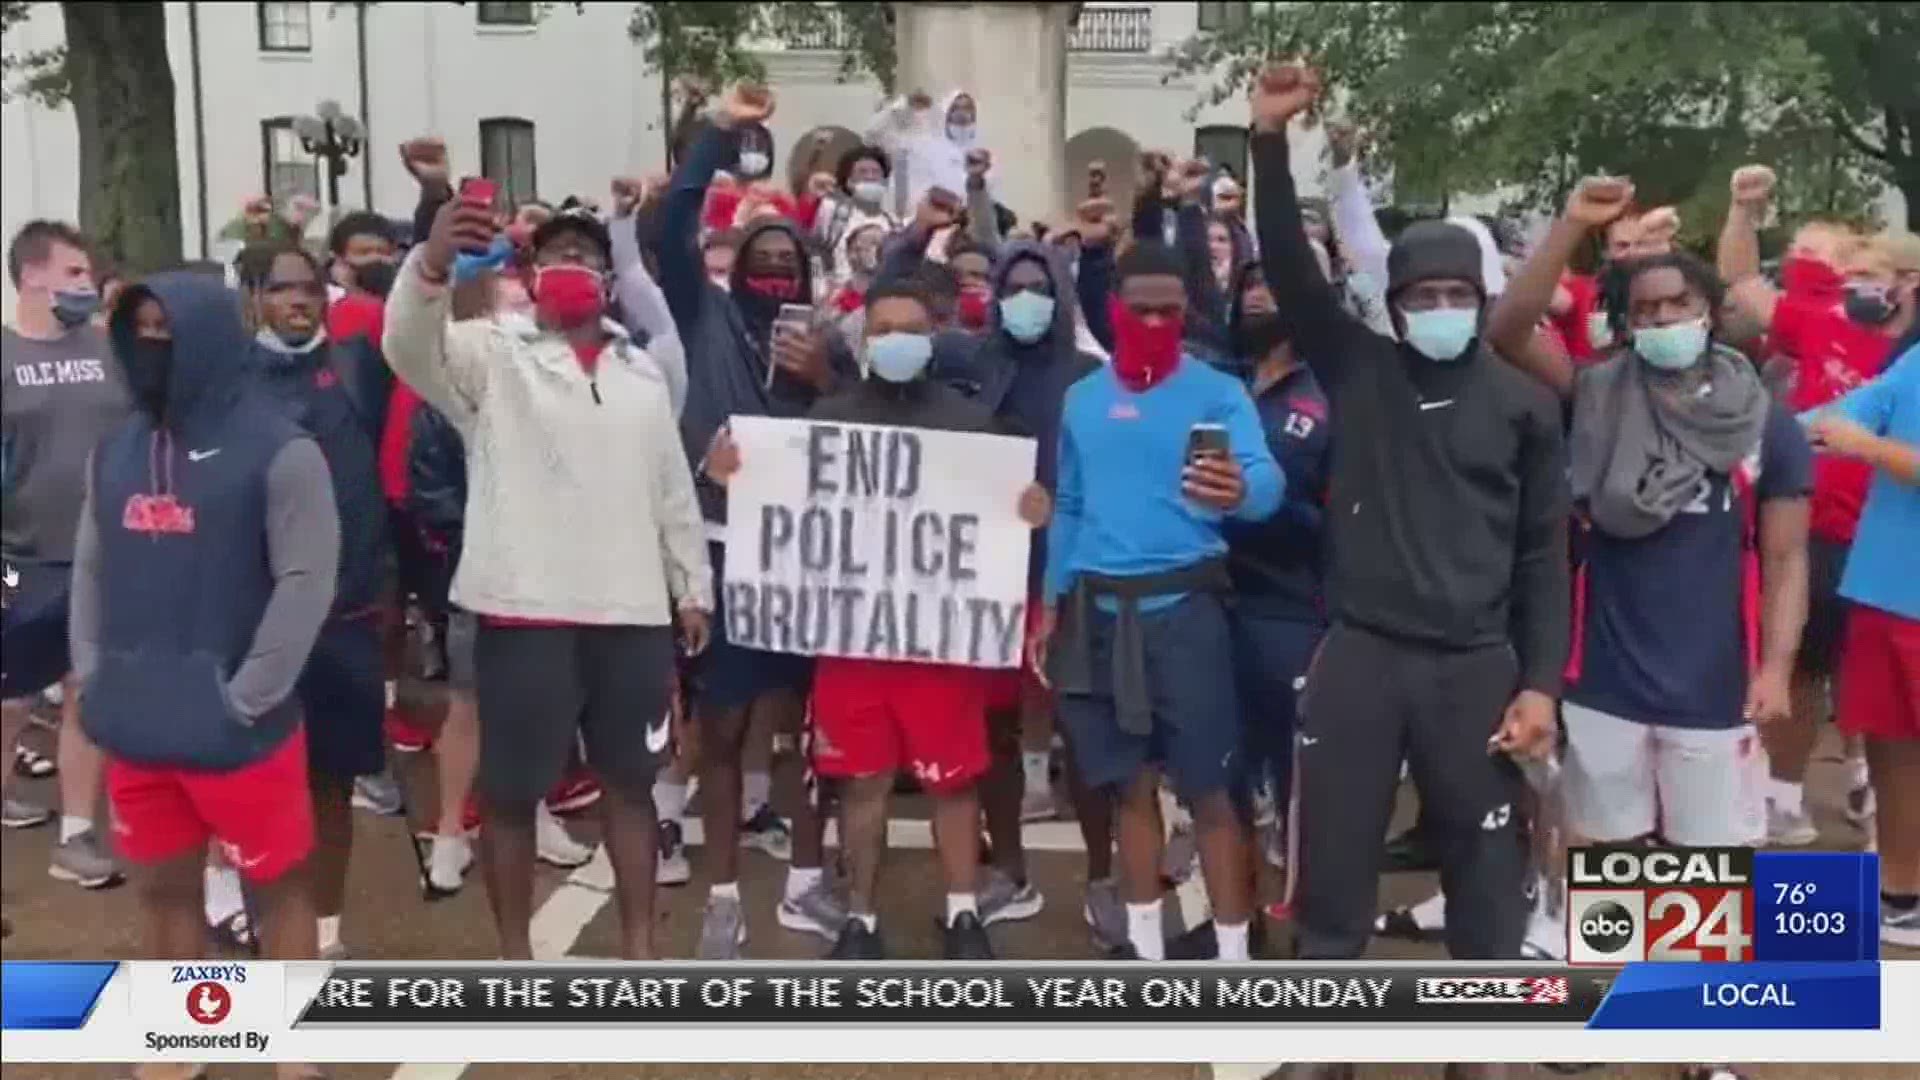 Ole Miss held a peaceful football team protest Friday morning.